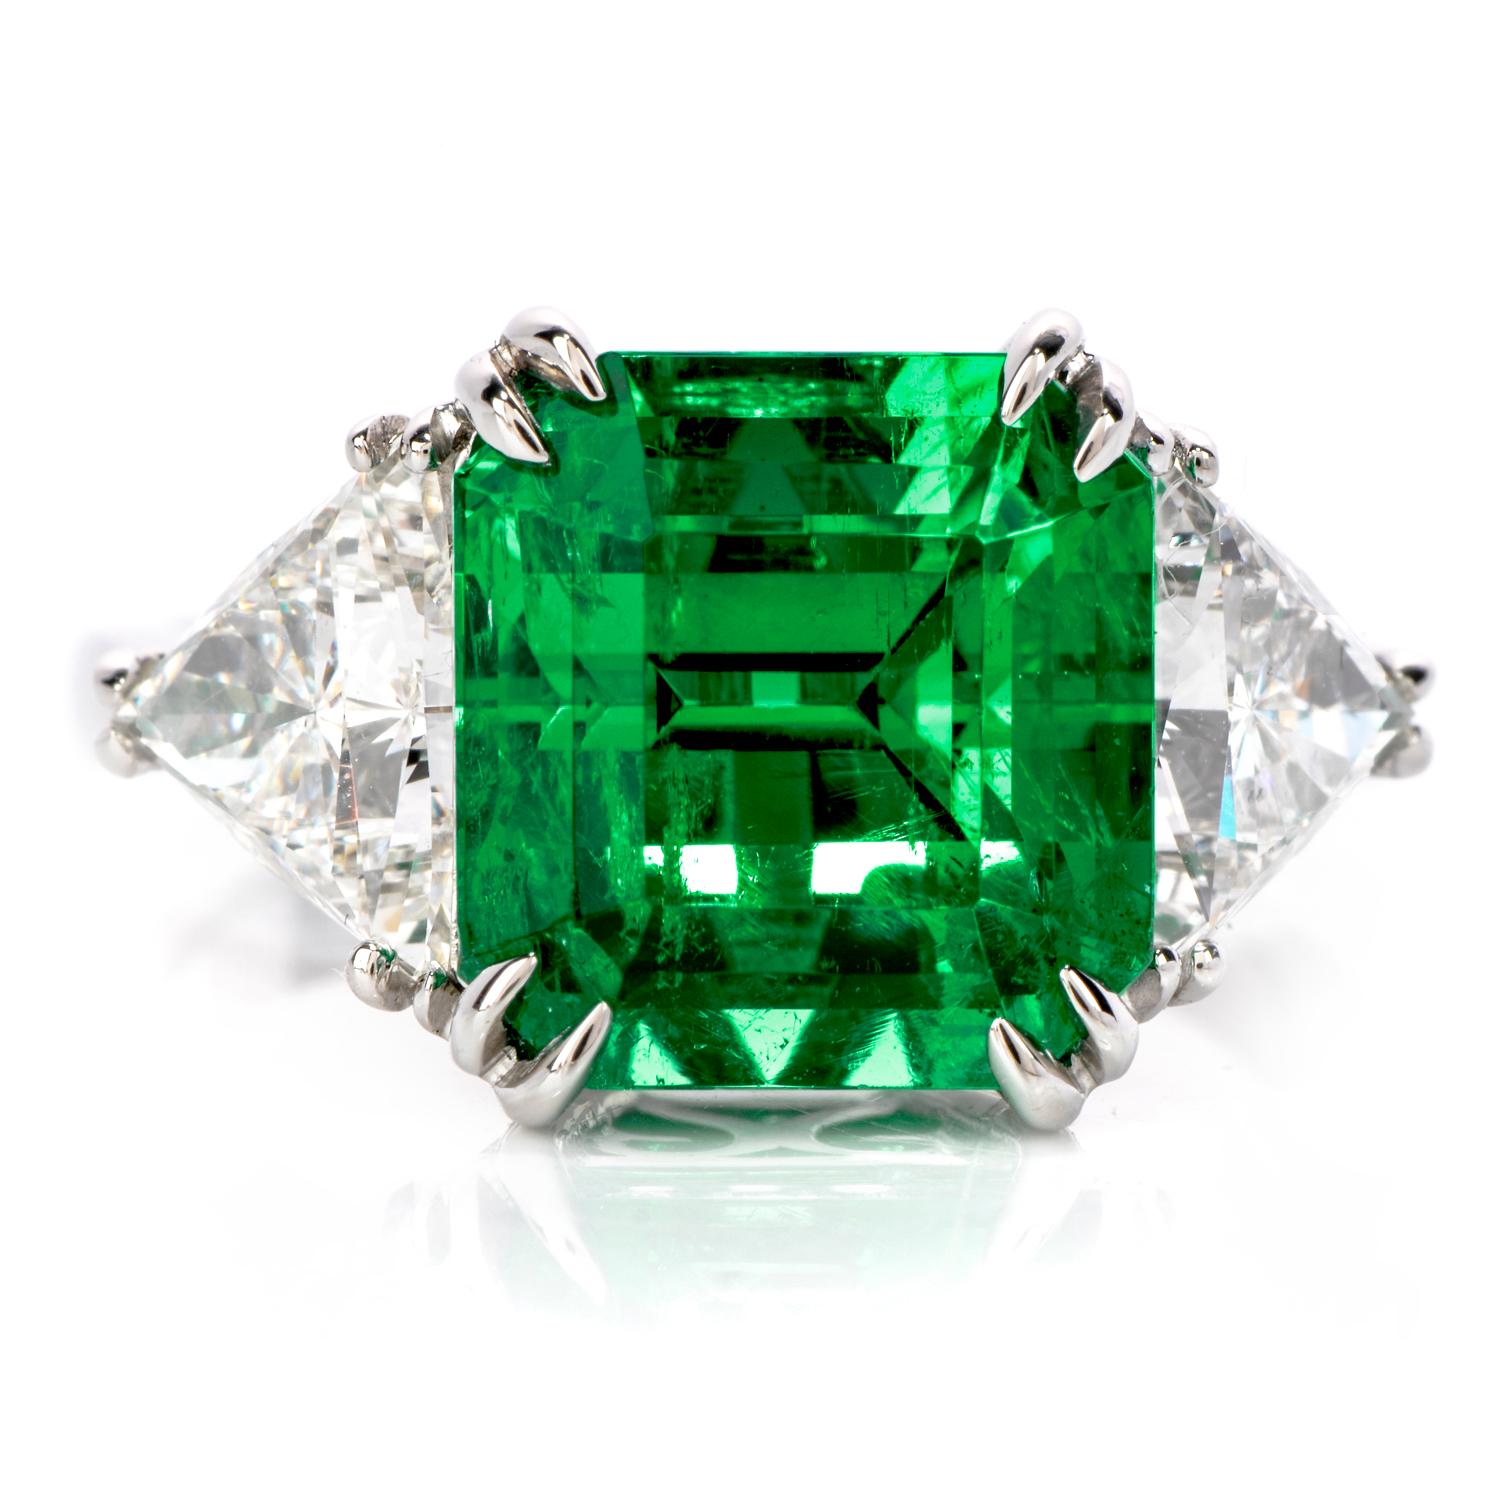 Dover Jewelry Present this Stunning Square Colombian Emerald Diamonds handcrafted is solid platinum. Displaying vibrancy and elegance, it is centered with 1 genuine square cut Emerald extremely fine in color and clarity, weighing approx. 5.81carats,